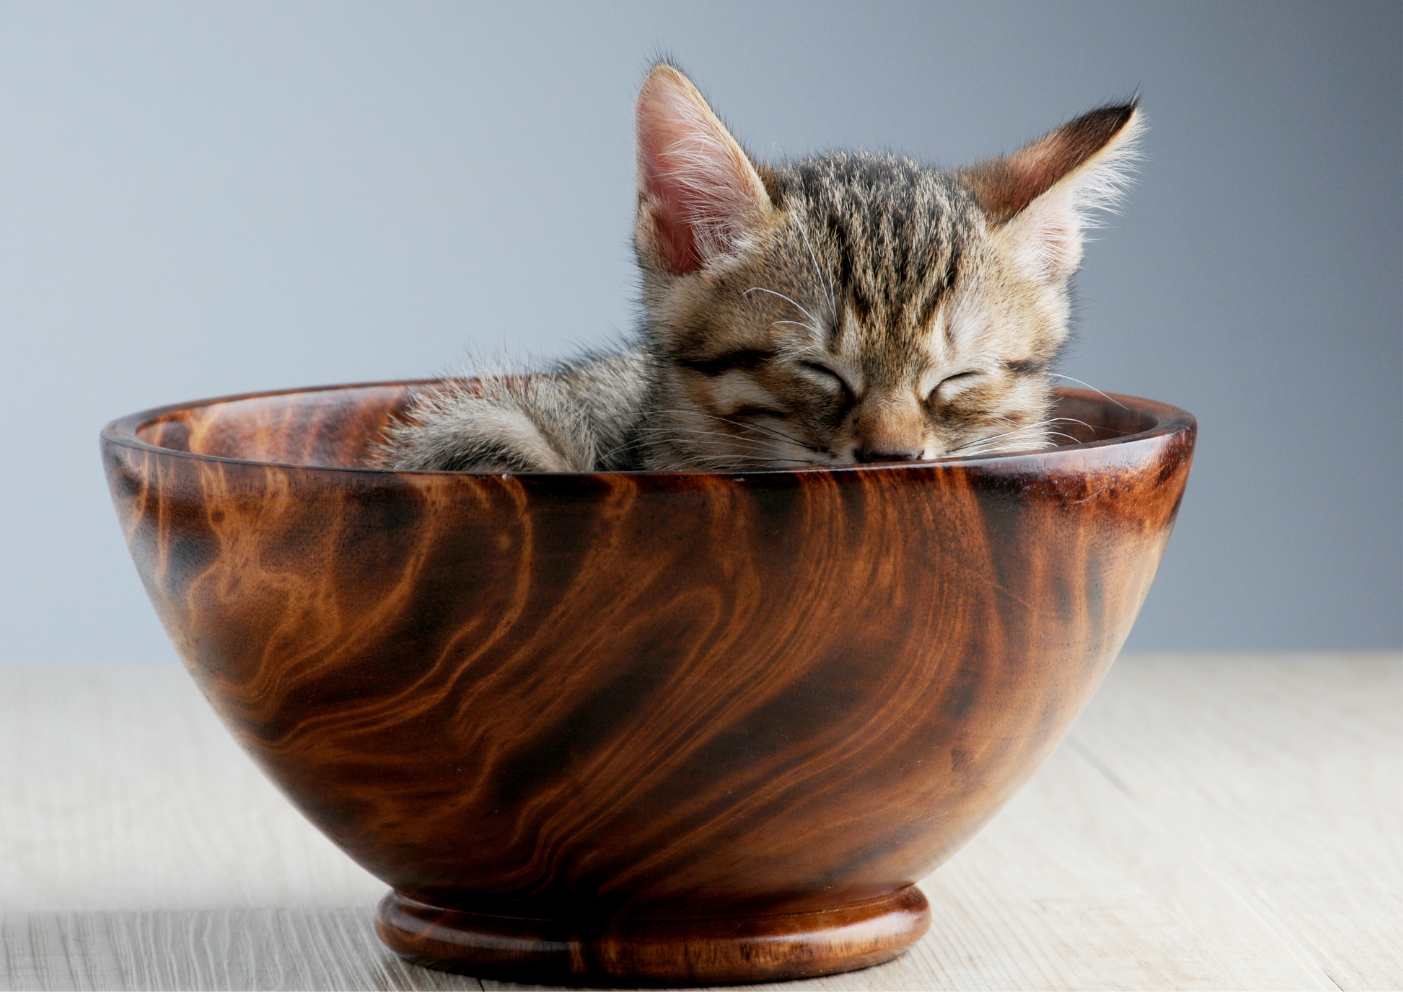 Reasons Why Your Pet’s Feeding Bowl Matters